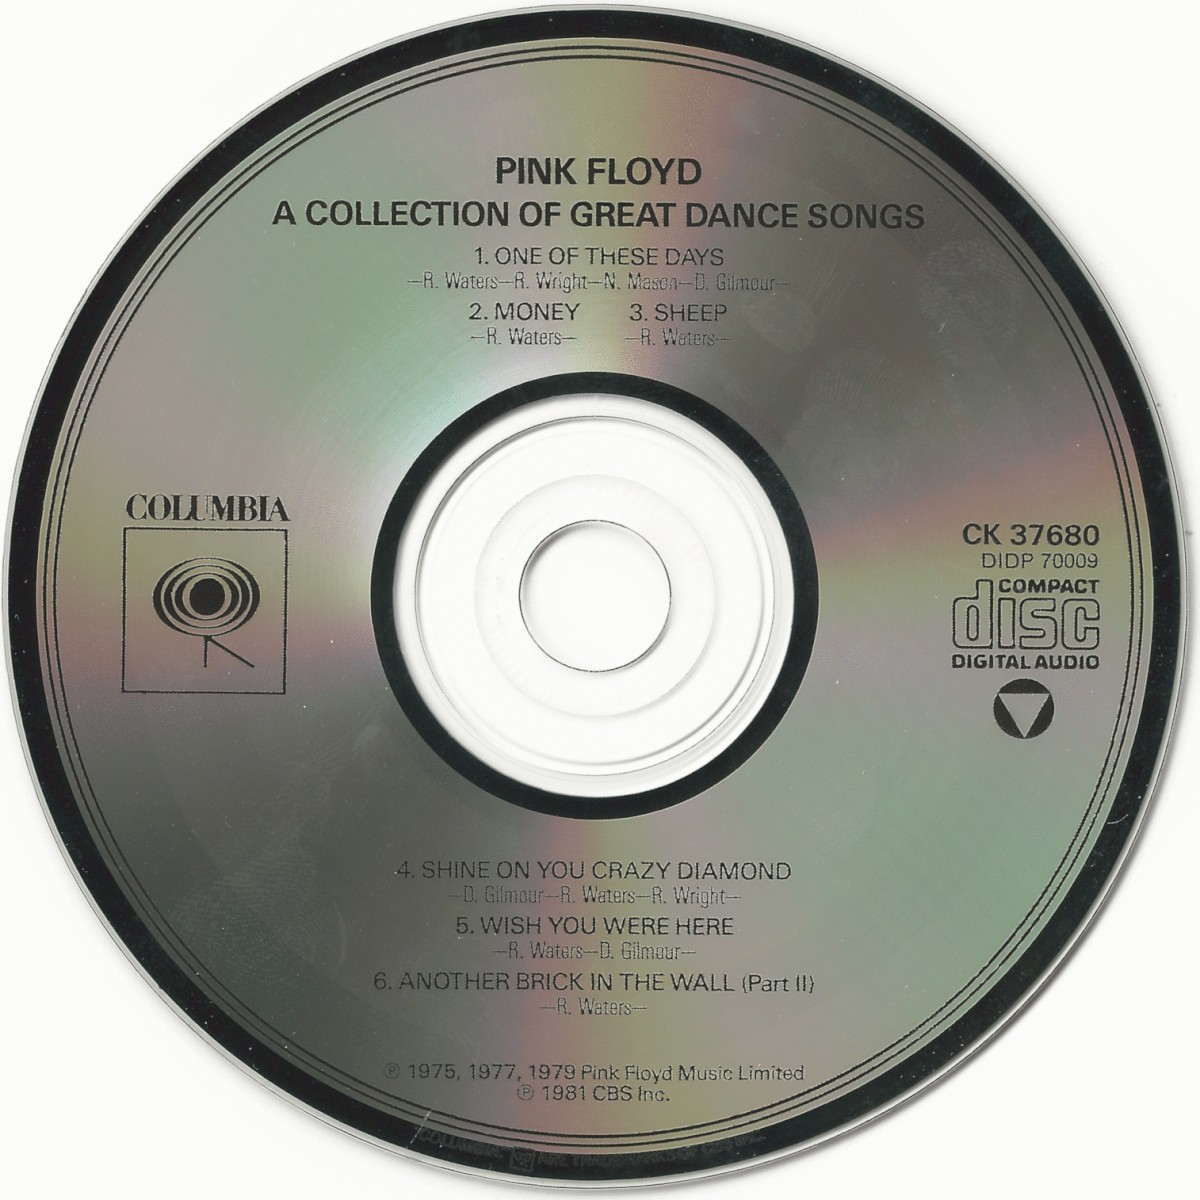 Release “A Collection of Great Dance Songs” by Pink Floyd - Cover 